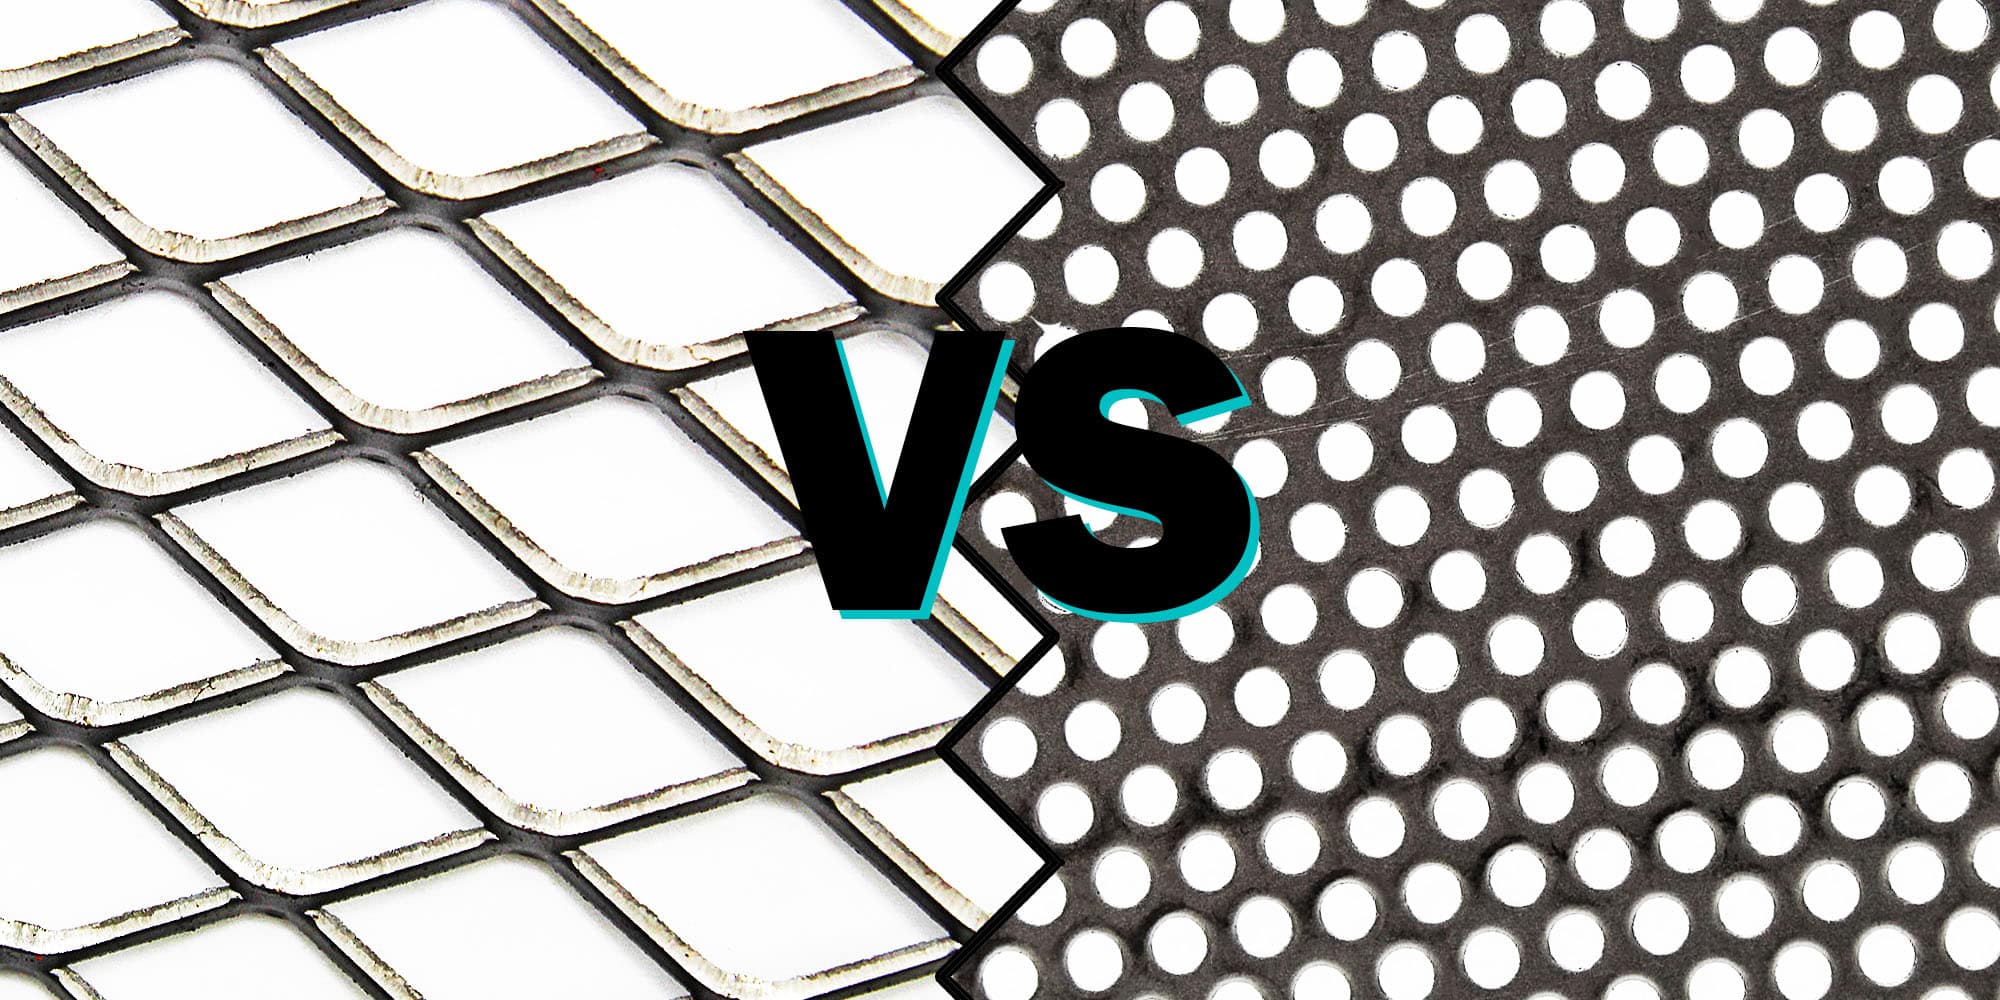 Expanded Mesh vs. Perforated Metal: Which Should You Choose? - The